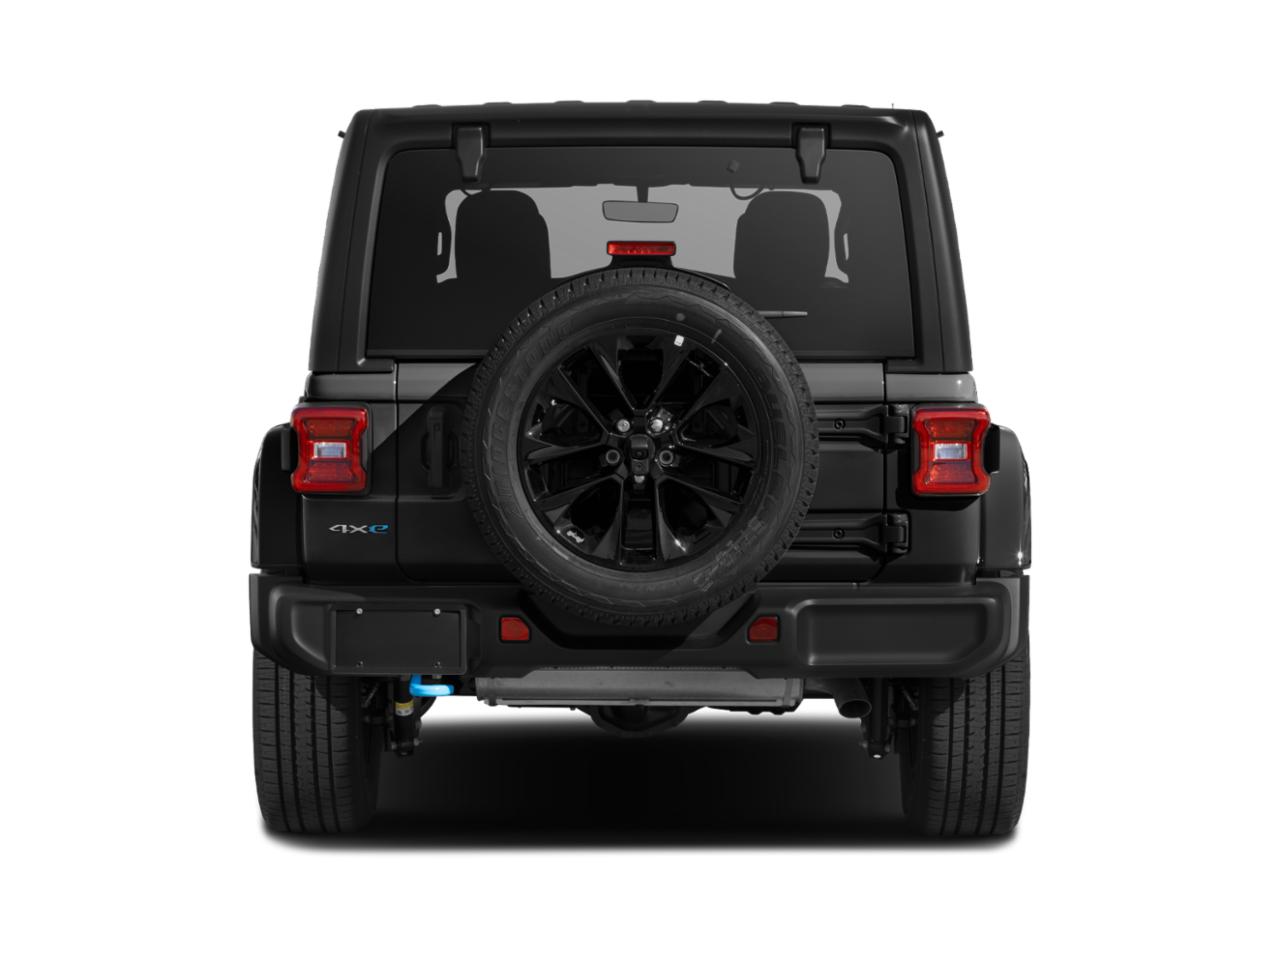 2022 Jeep Wrangler 4xe lease $679 Mo $0 Down Leases Available